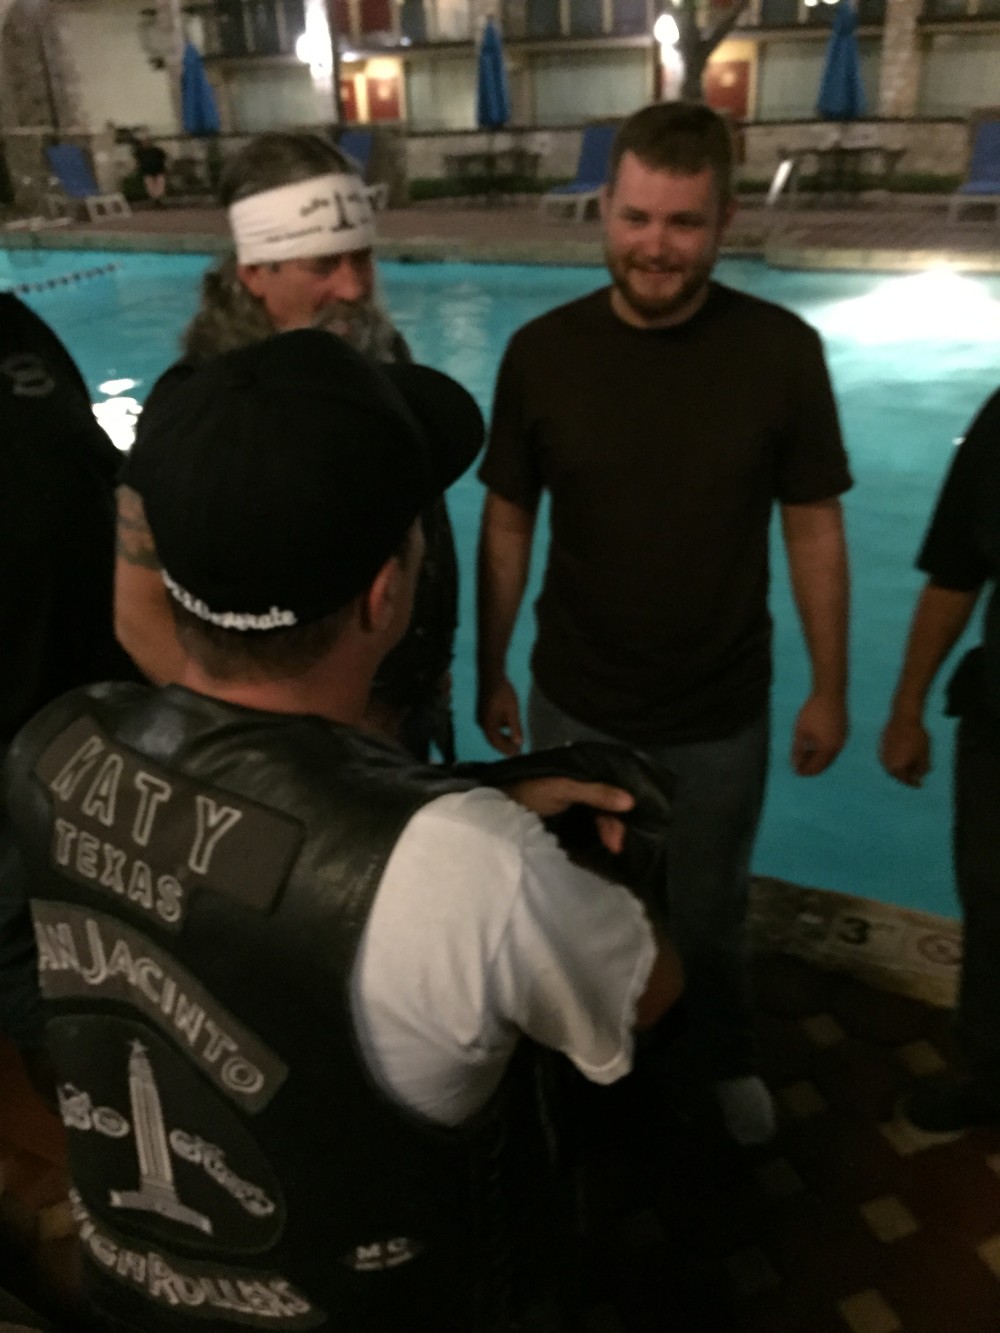 High Roller Bueller Patch In – June 2015 | San Jacinto High Rollers MC - Katy Chapter